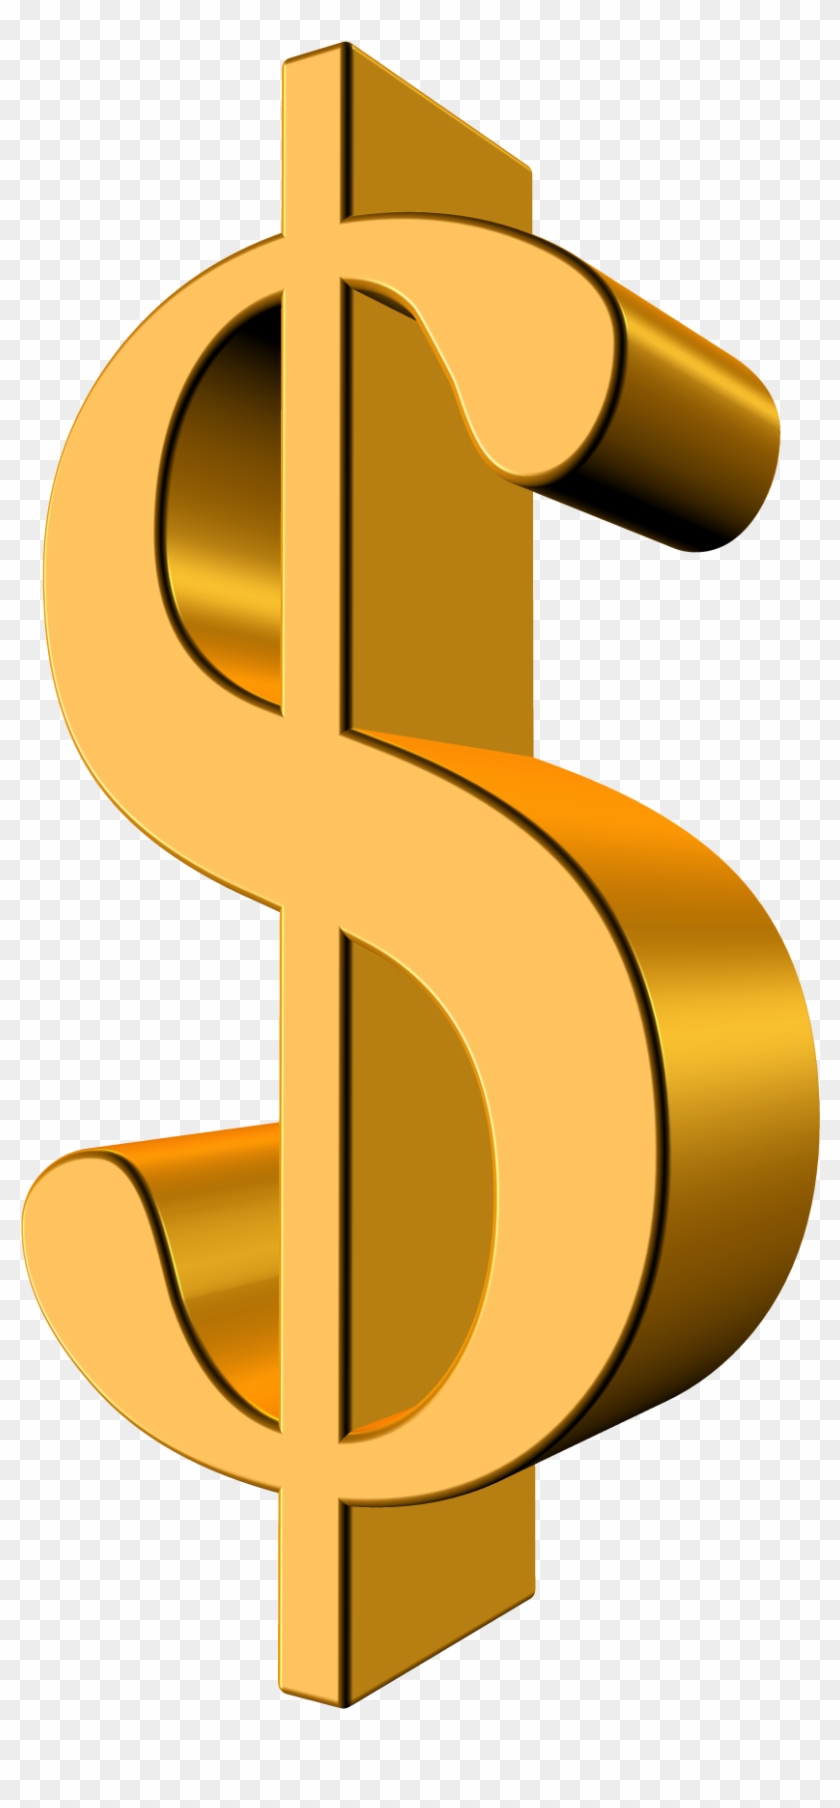 Dollar Png Image With Transparent Background - Dollar Png #377171